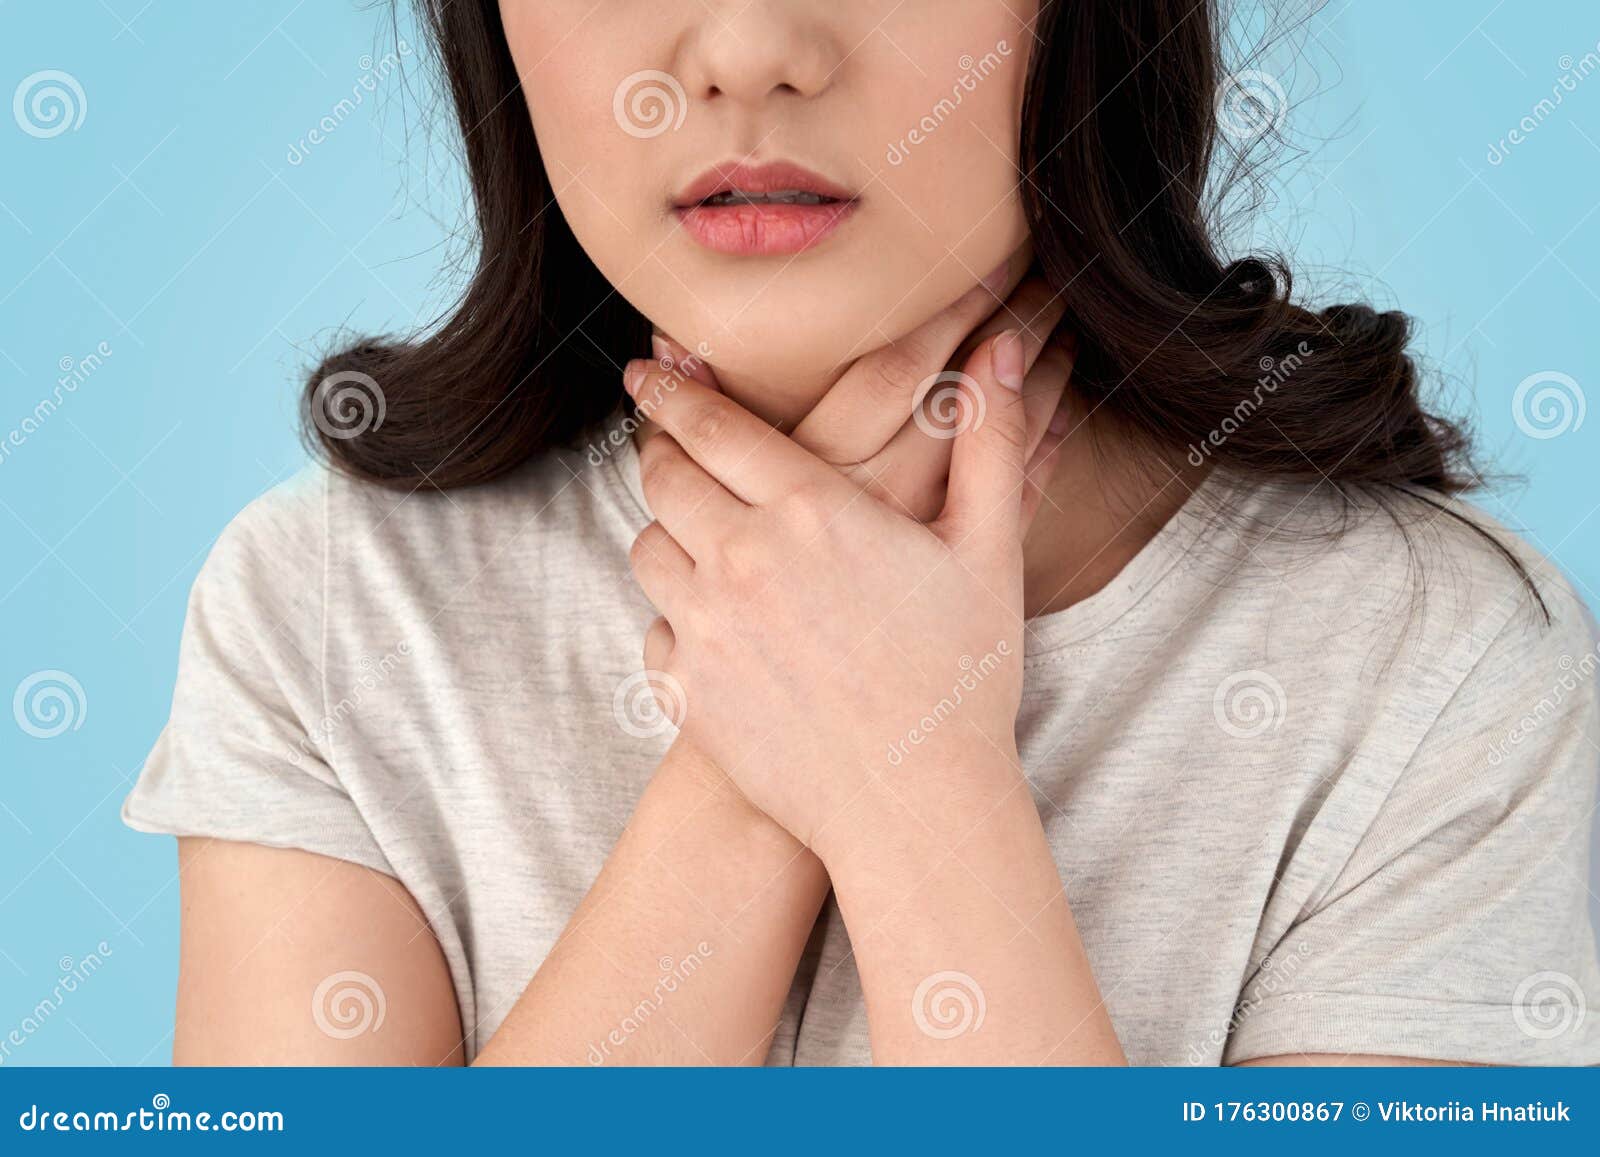 Young Adult Asian Girl With Sore Throat Stock Image Image Of Chinese